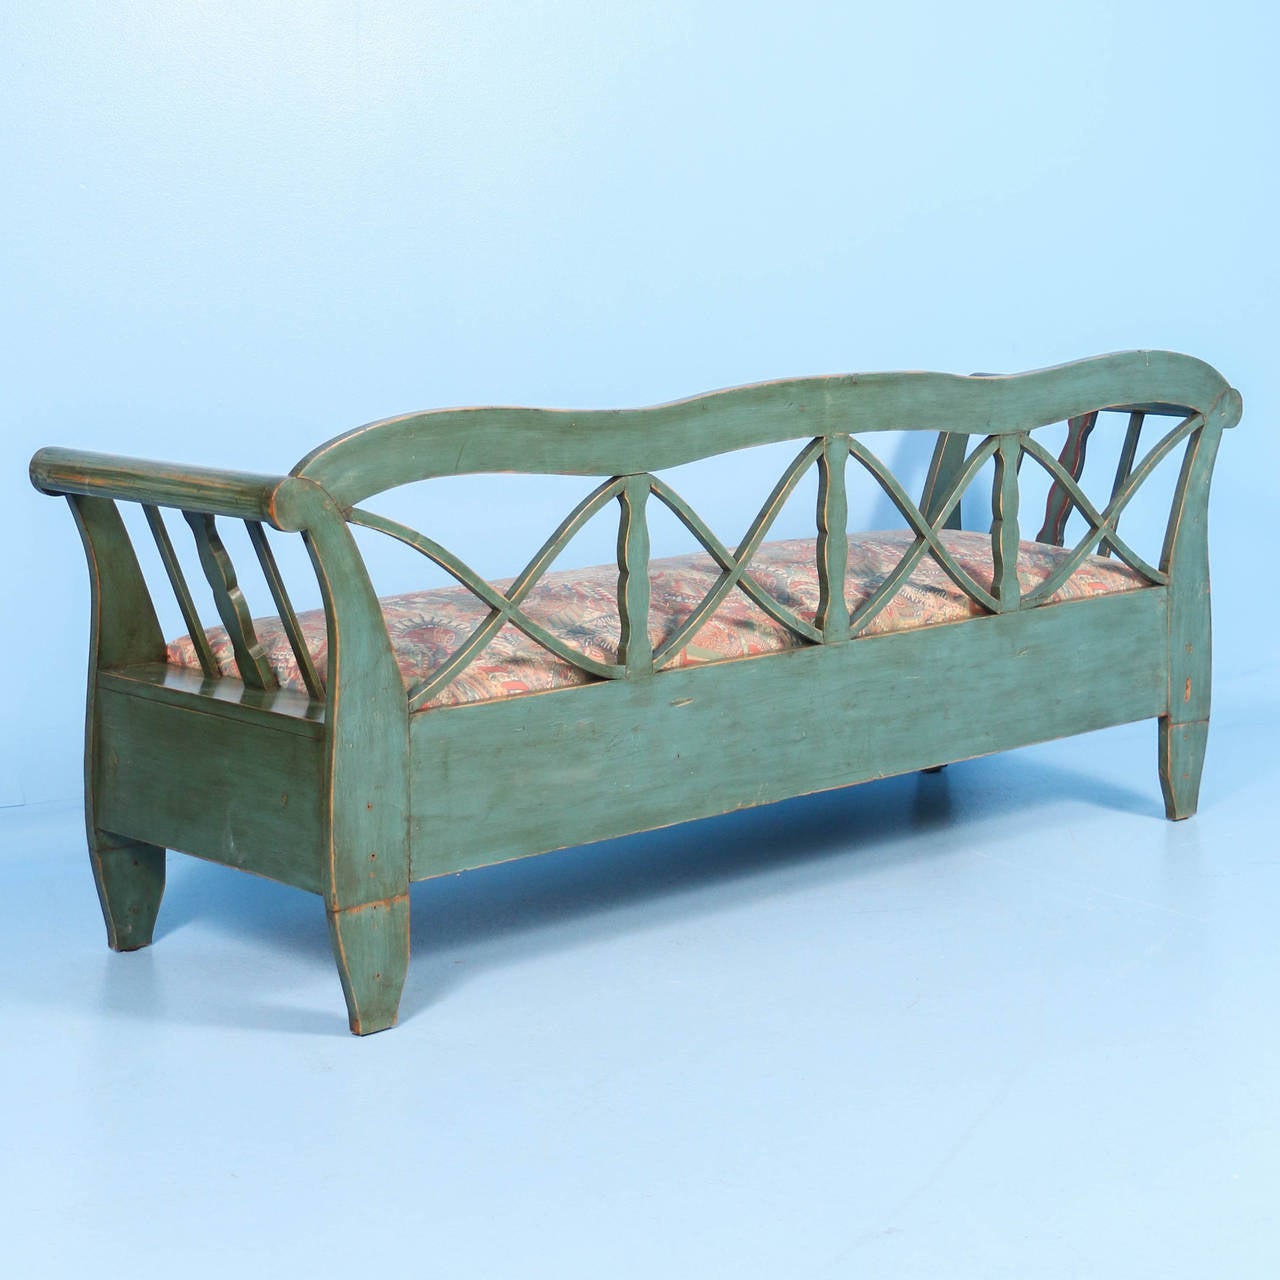 This original painted green Swedish bench is accented with red trim and red and white flowers. The soft color palette is a wonderful compliment to the graceful curves and lattice work back of this pine bench.  Please review the close up photos to